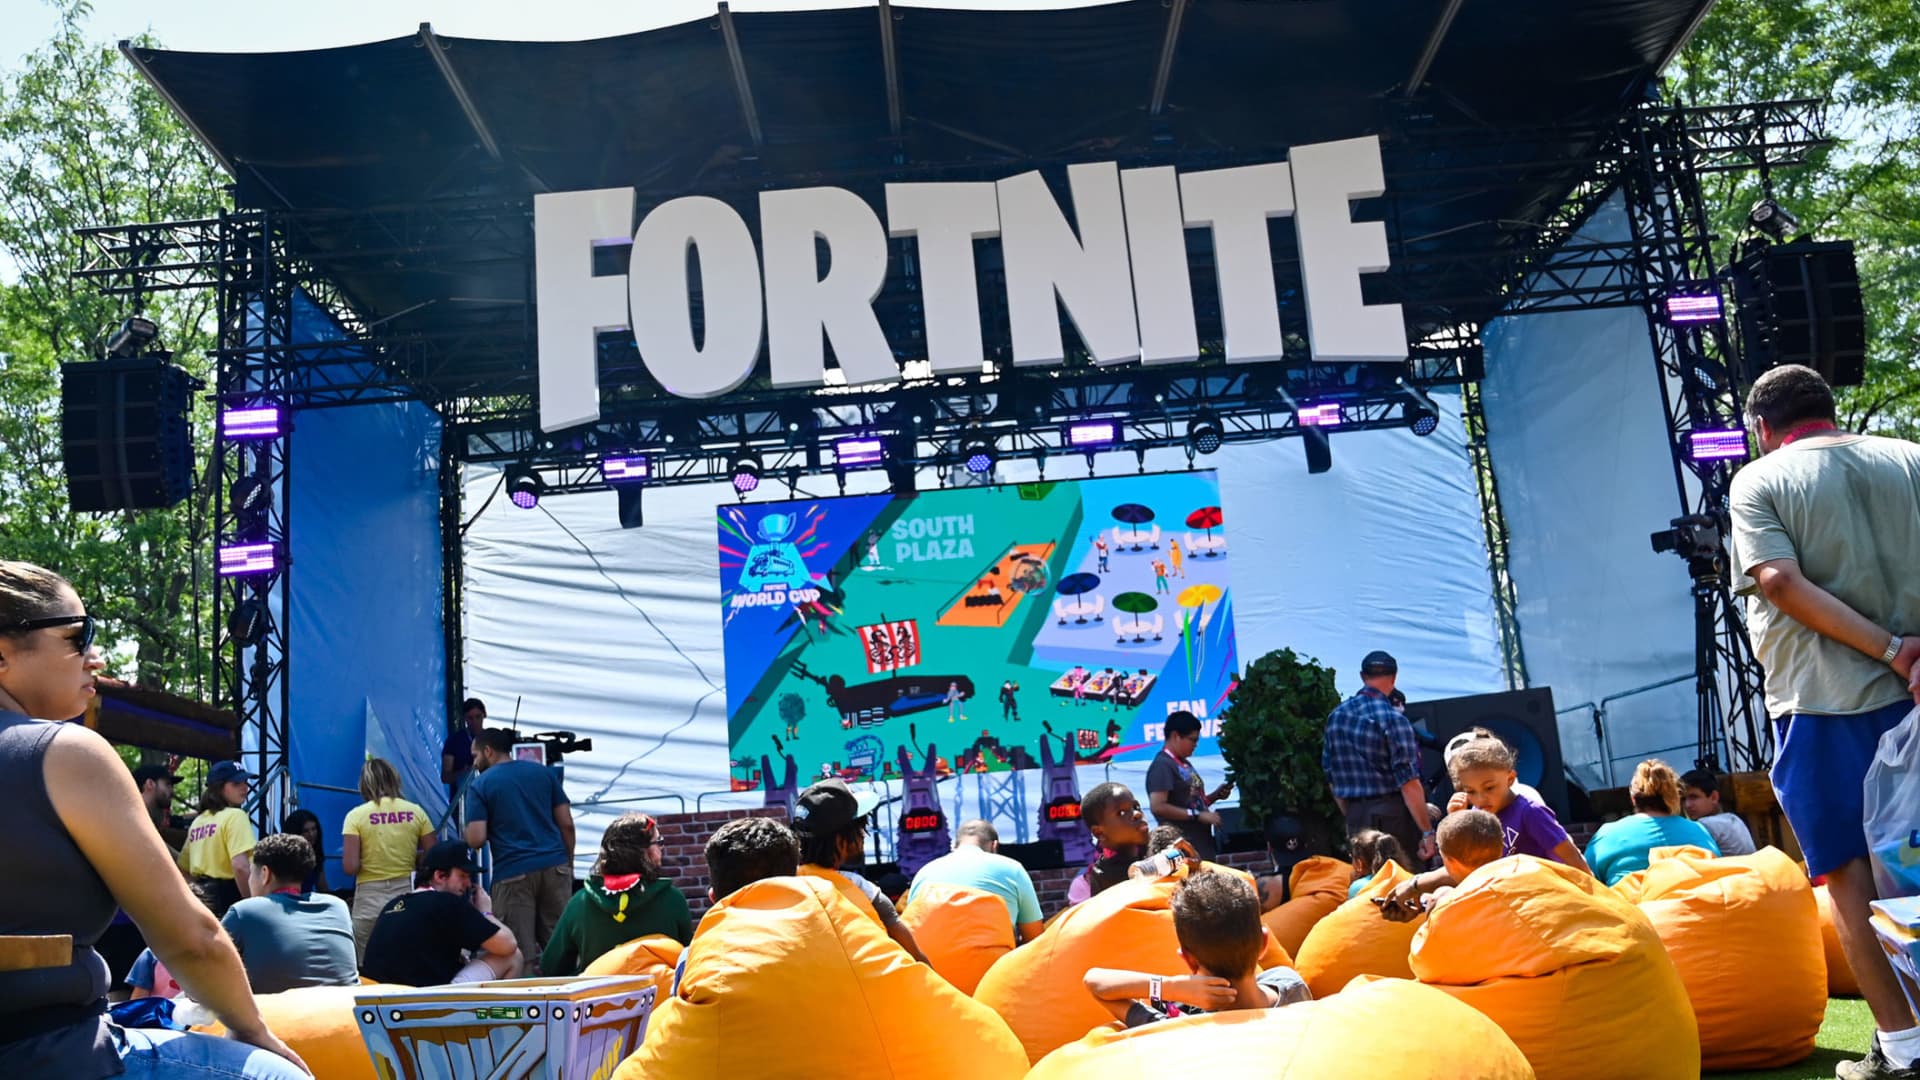 Apple sued by Fortnite maker after kicking the game out of App Store for payment policy violations